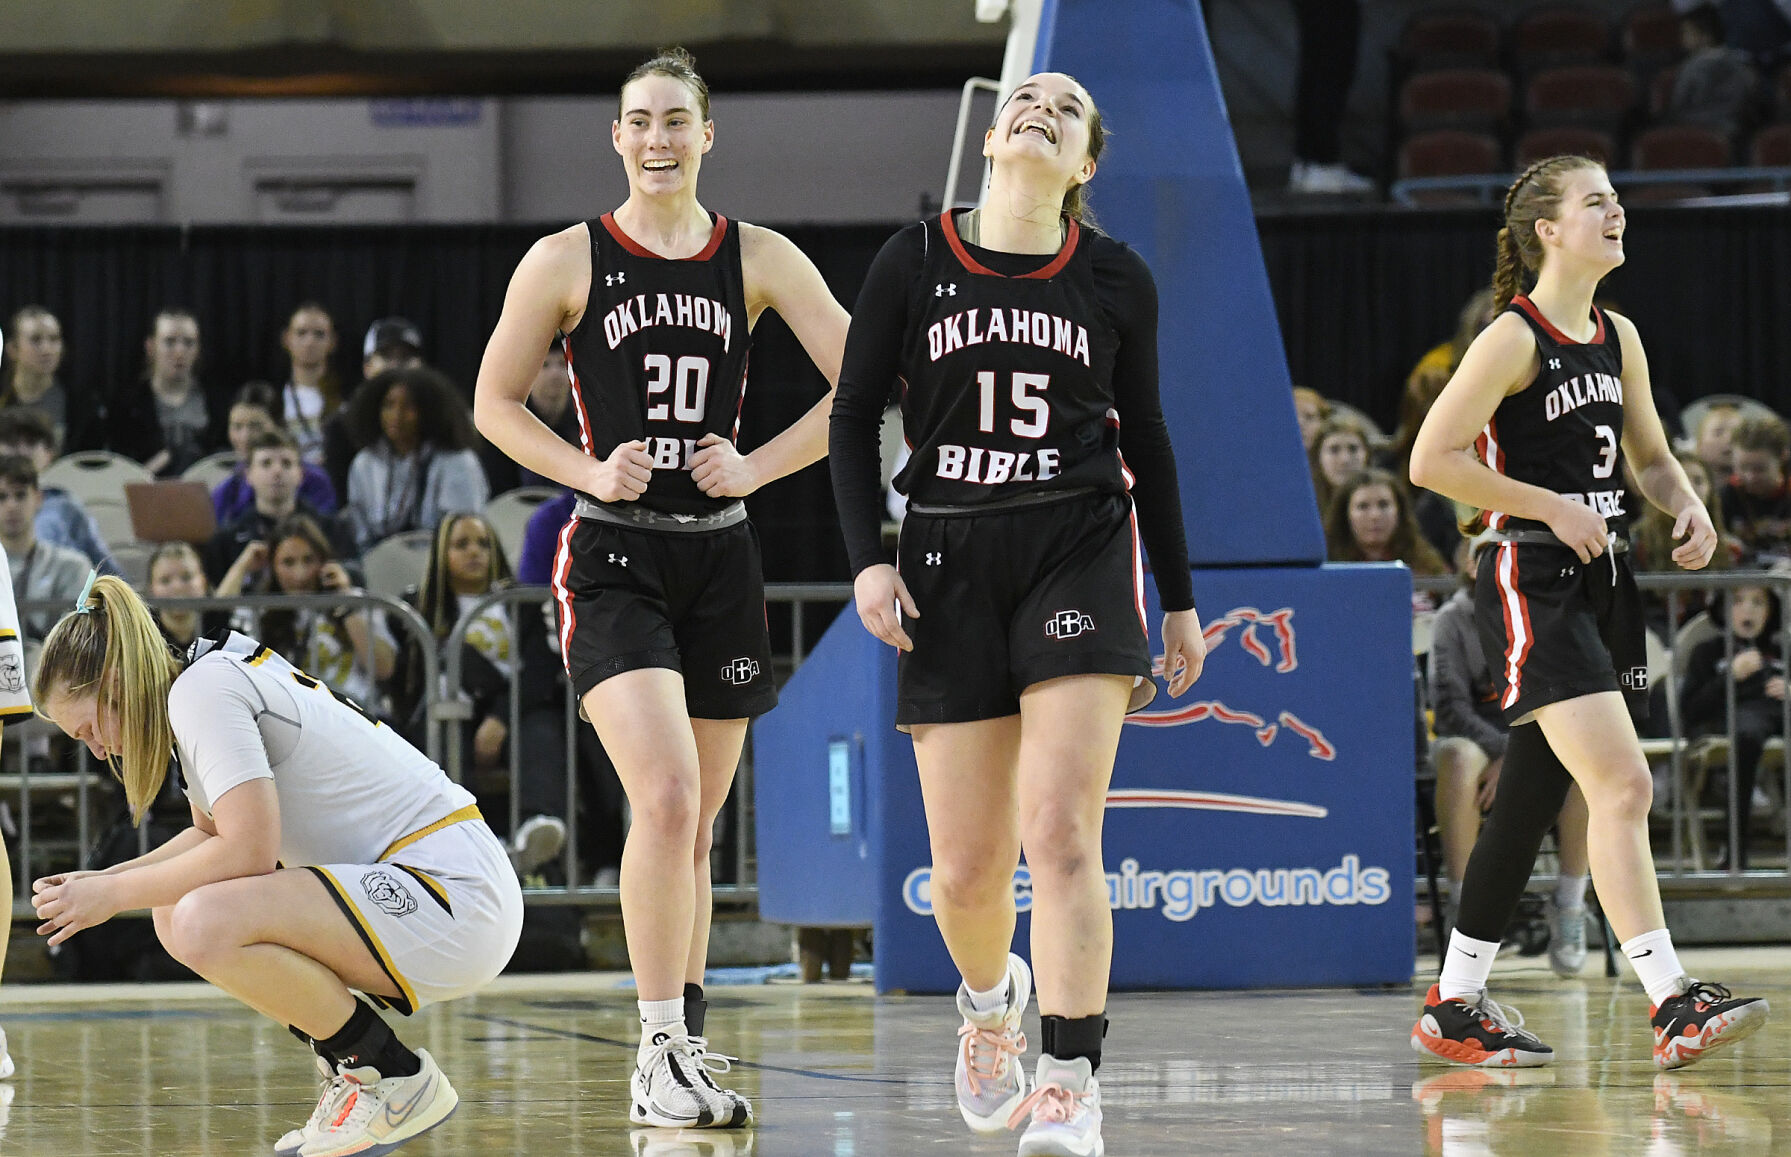 Oklahoma Bible Academy Girls Reach State Final Against Seiling in Class A Championship